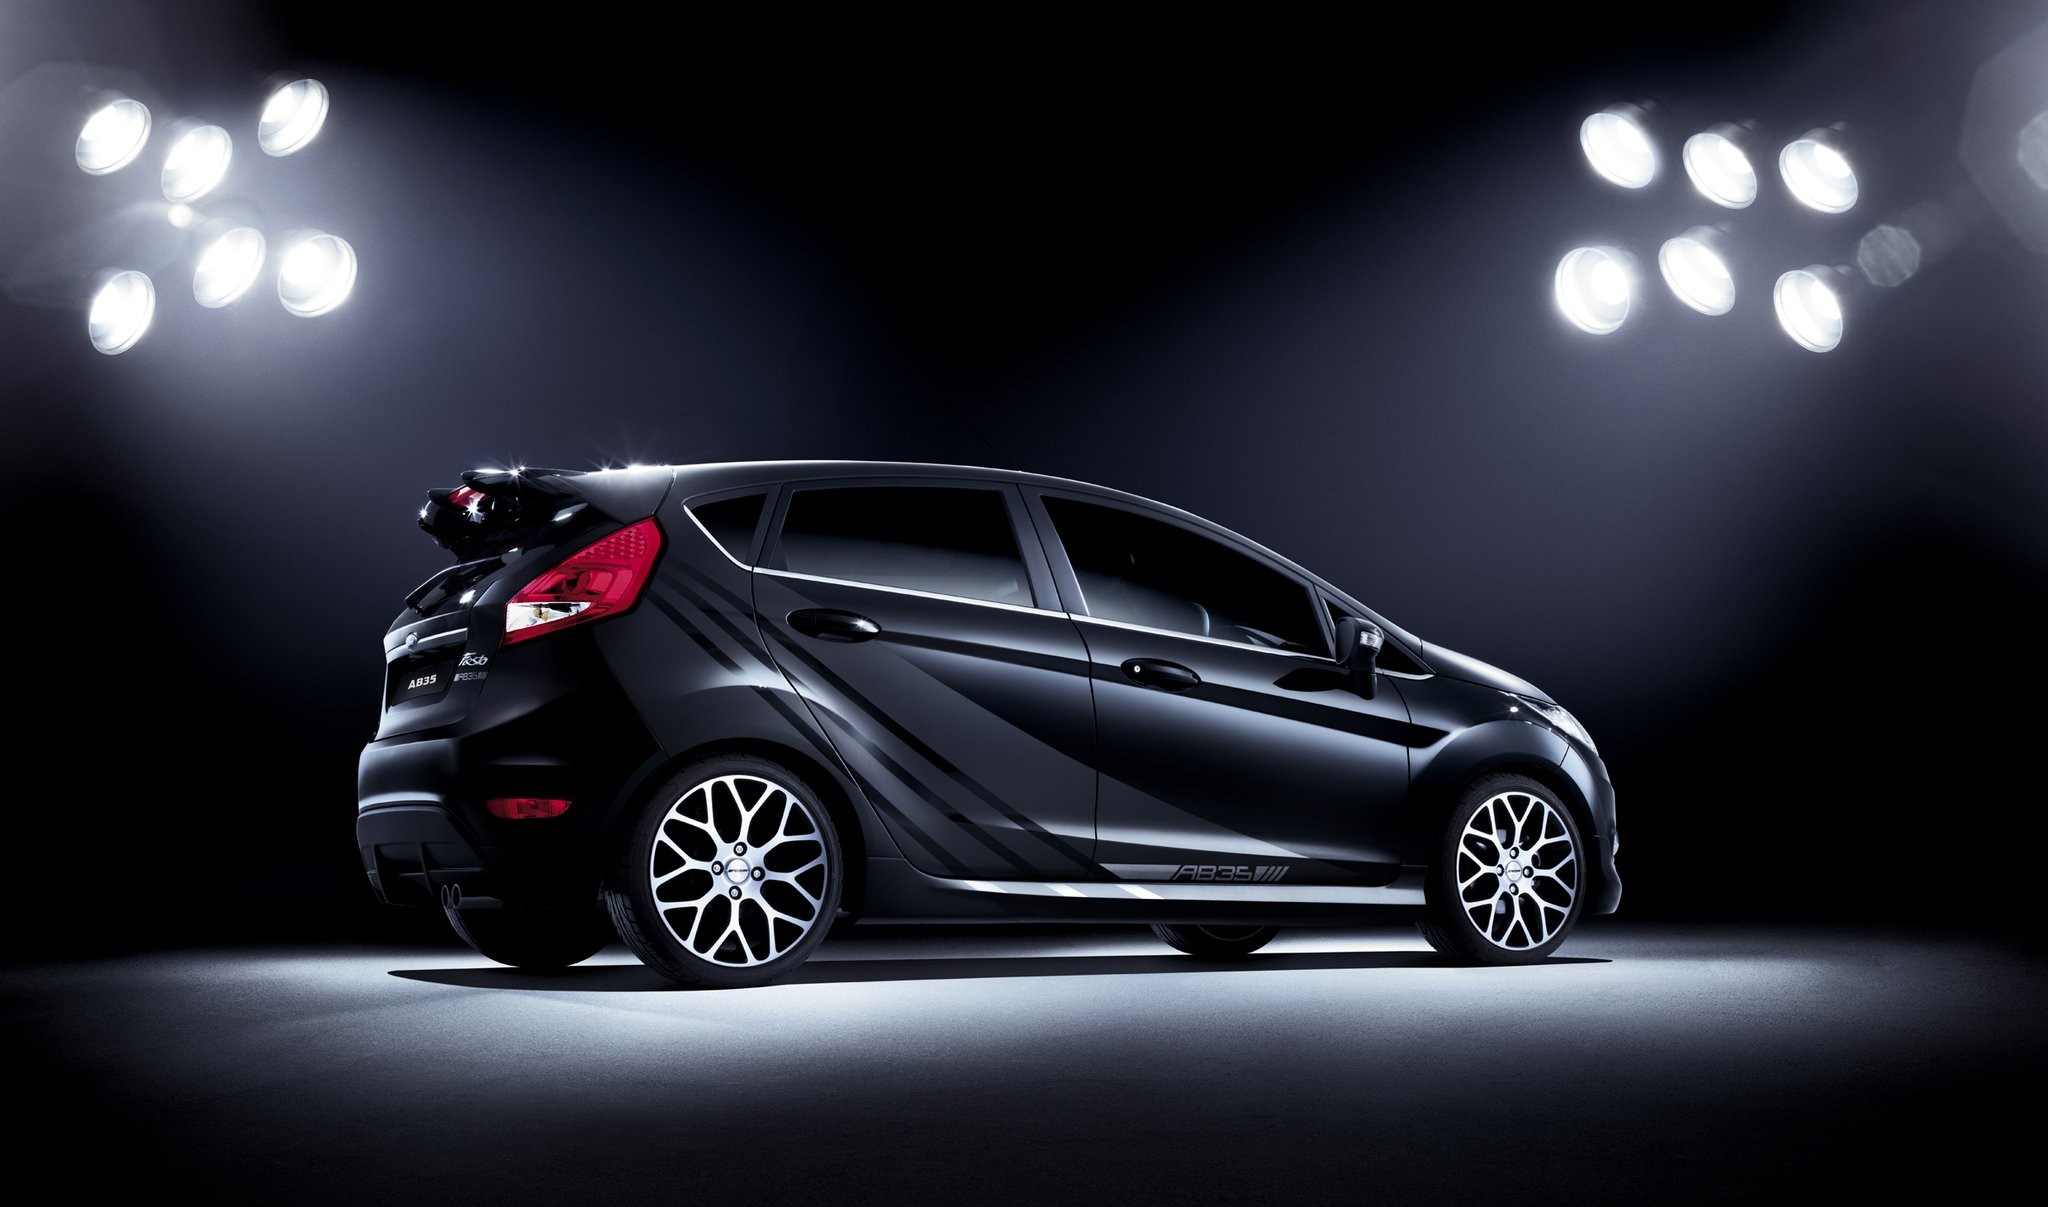 2048x1207 on August 20, 2015 By Stephen Comments Off on Ford Fiesta Wallpapers .